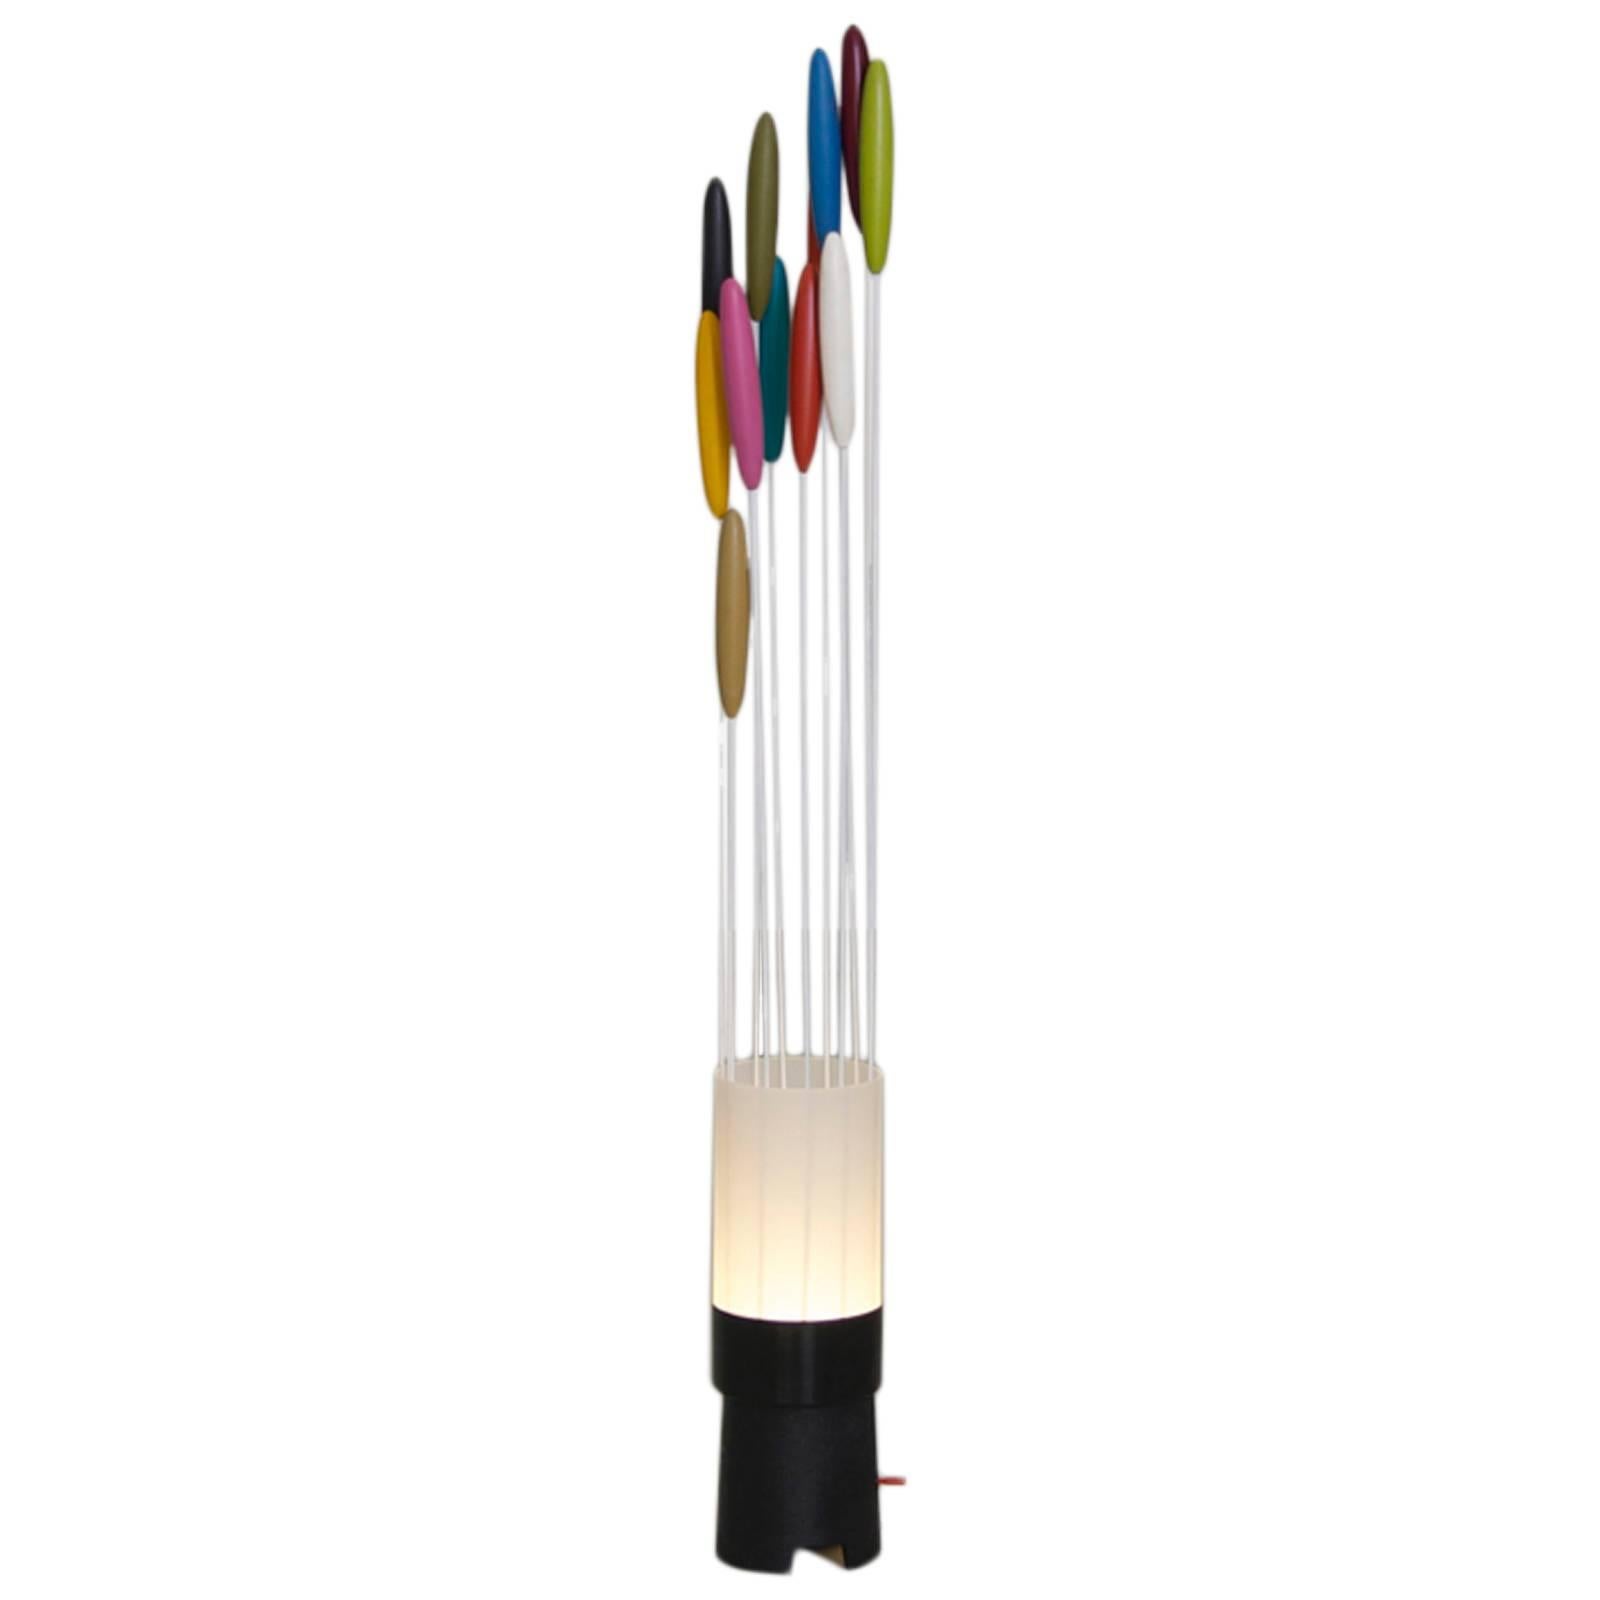  Cattail Floor Lamp by Bill Curry for Design Line